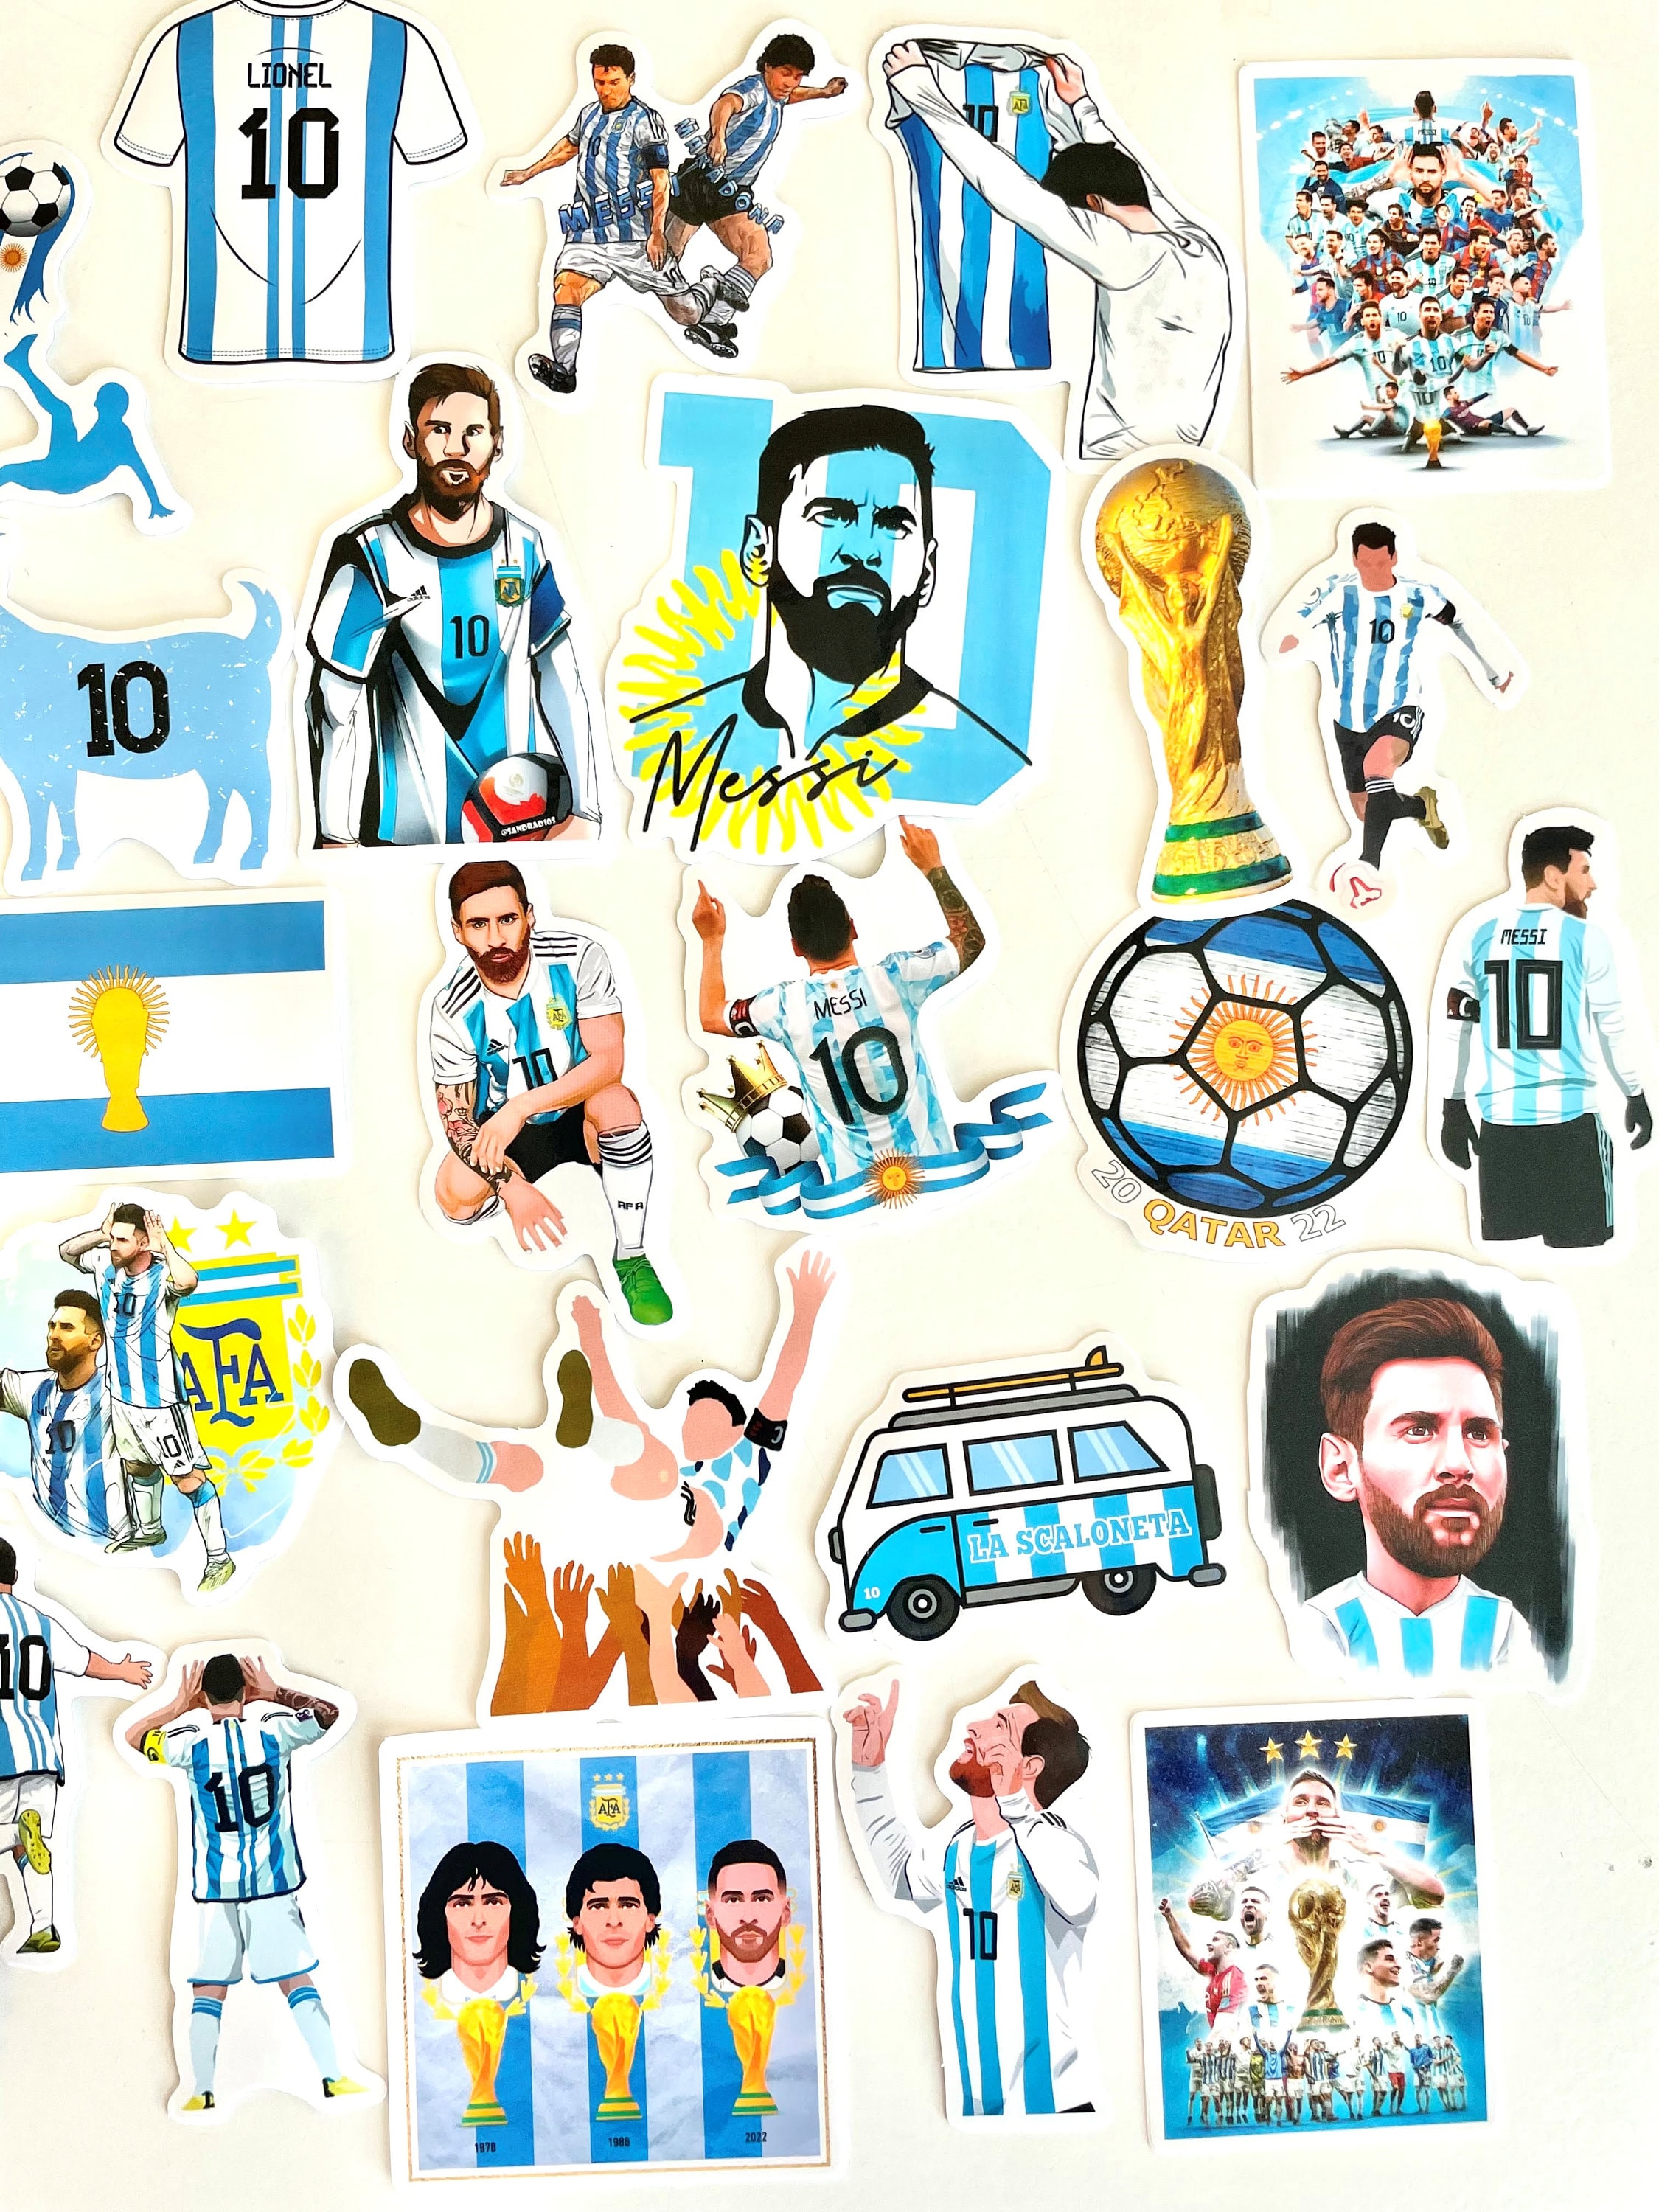 Messi Stickers 15, 25 or 52 Random Stickers Free Shipping - Etsy